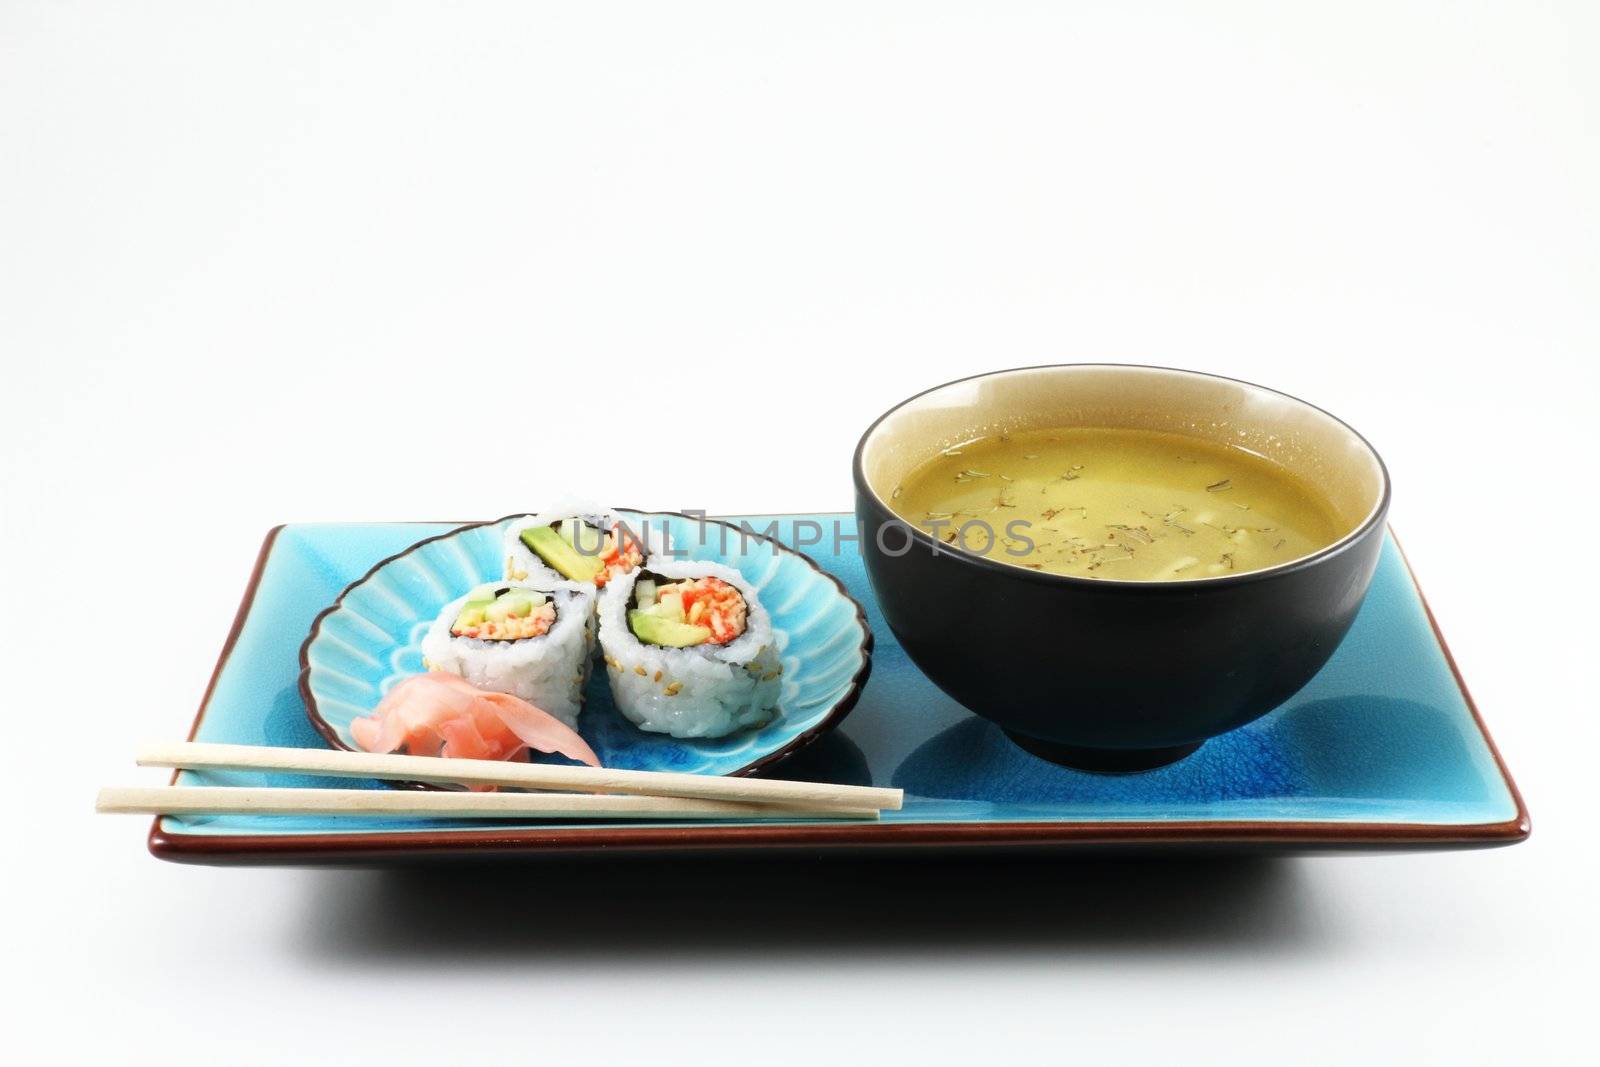 Sushi and soup on a blue plate with chop sticks.